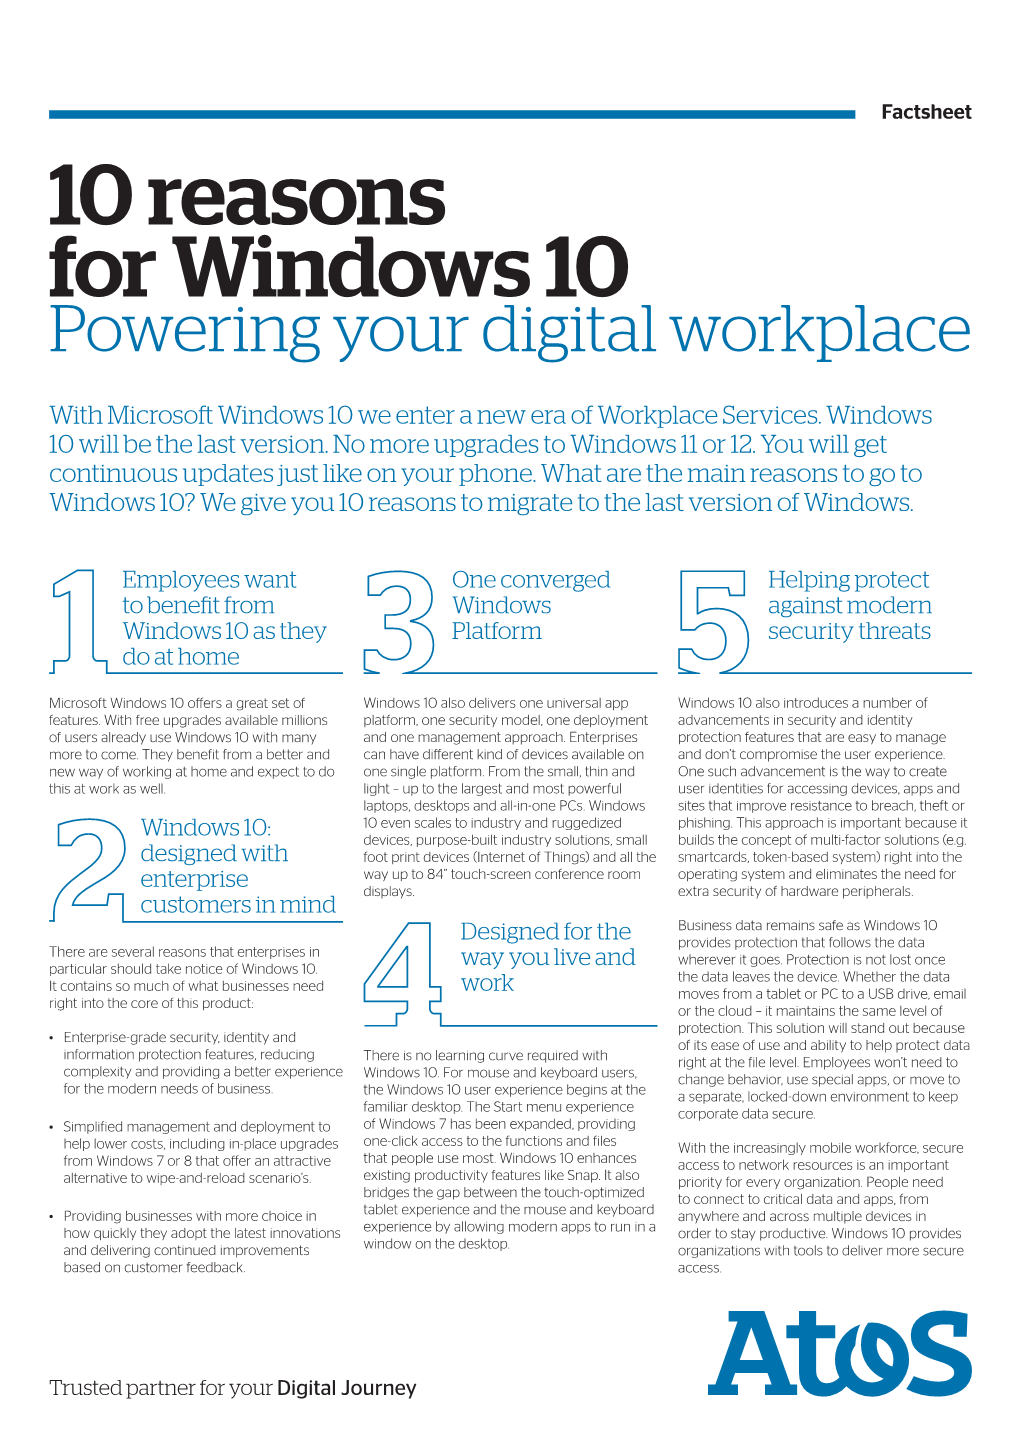 10 Reasons for Windows 10